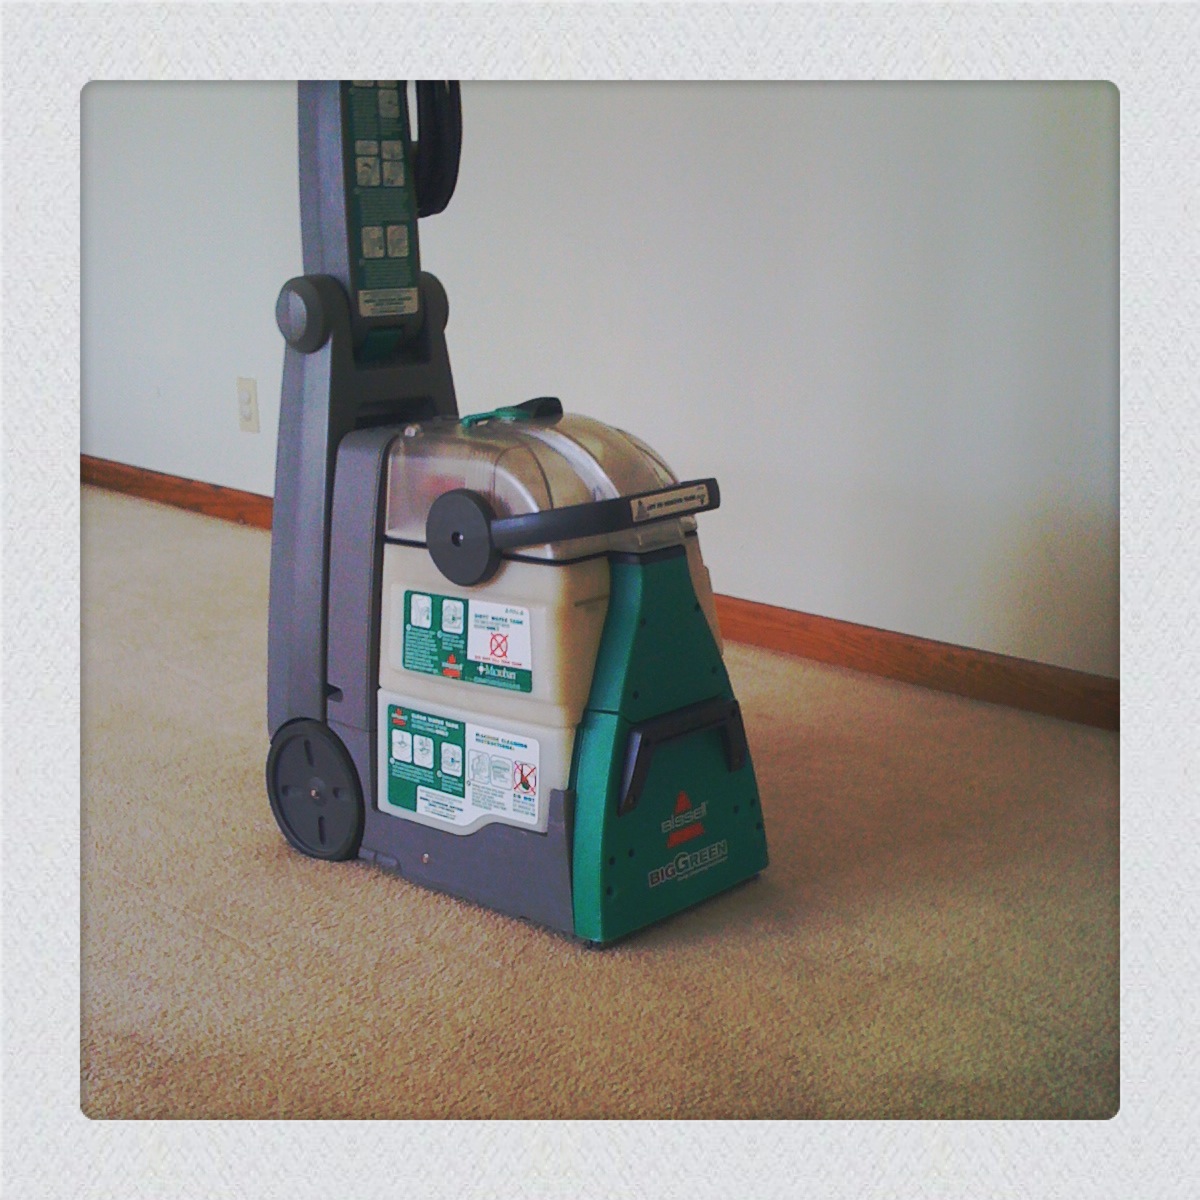 Free download to DIY with a Bissell take home steam cleaner rented from 